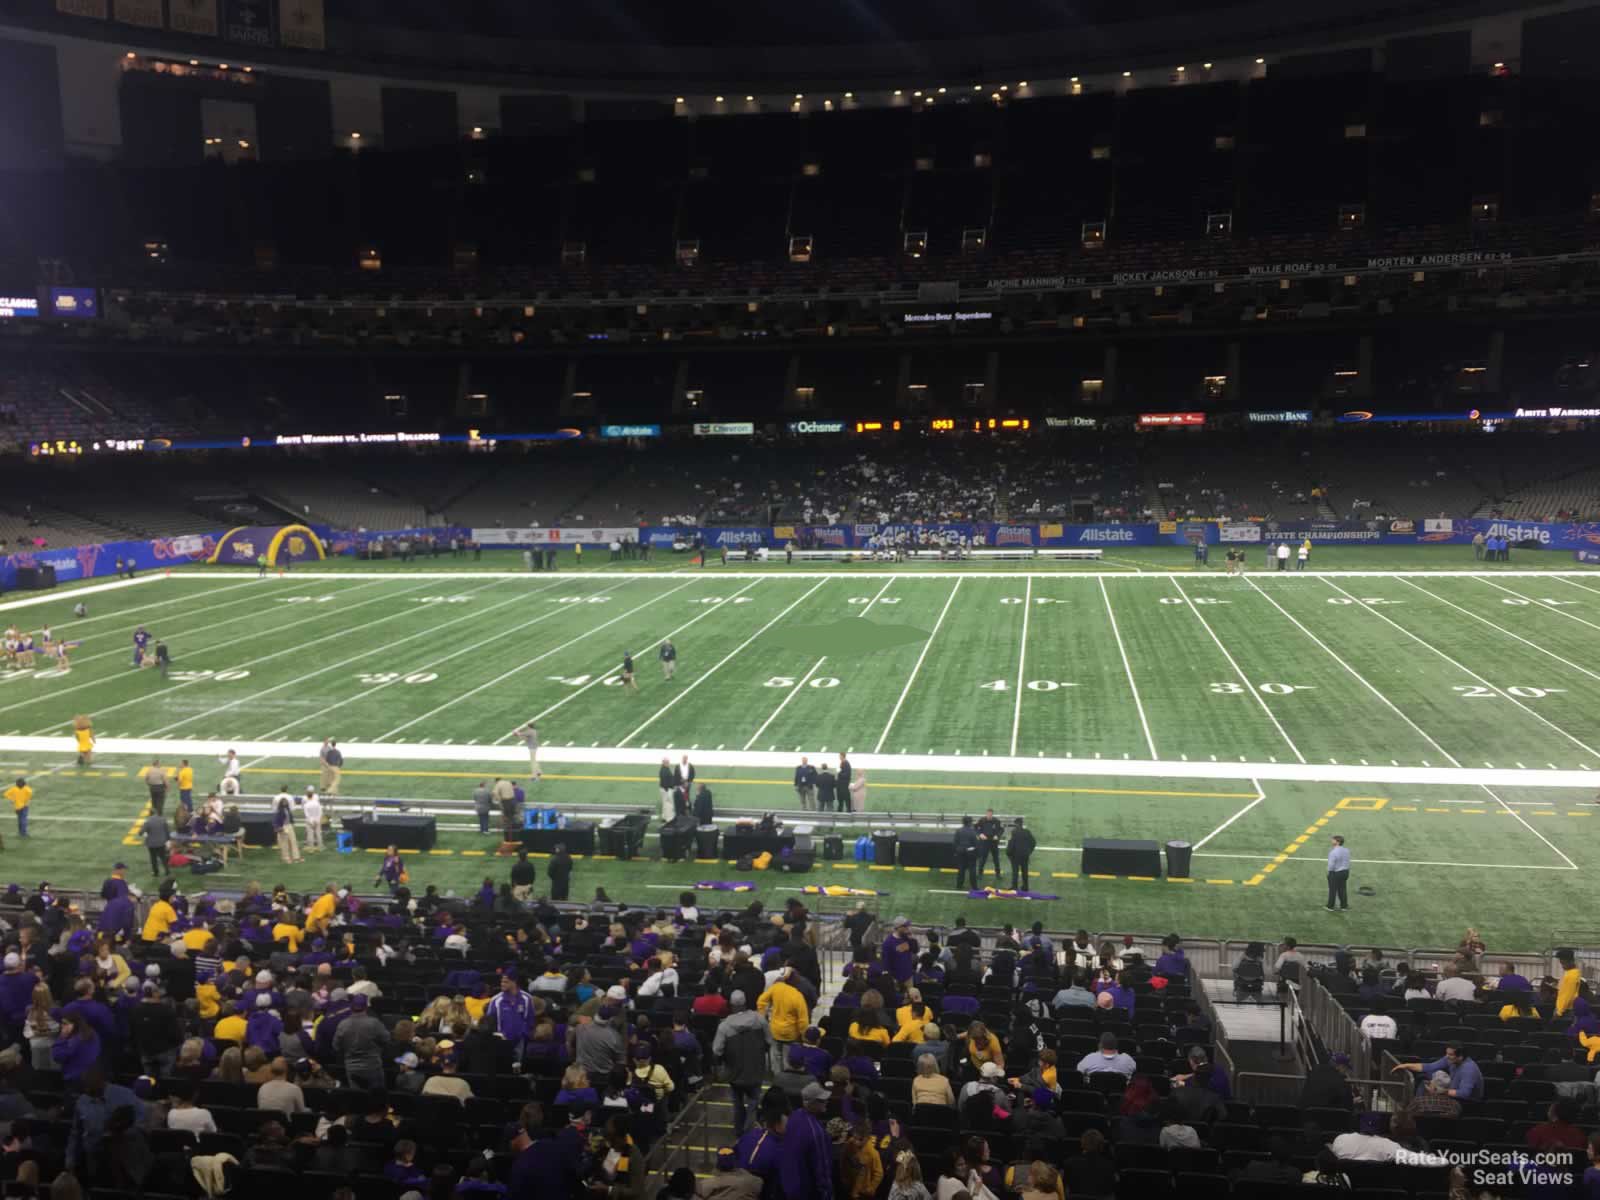 section 263, row 2 seat view  for football - caesars superdome